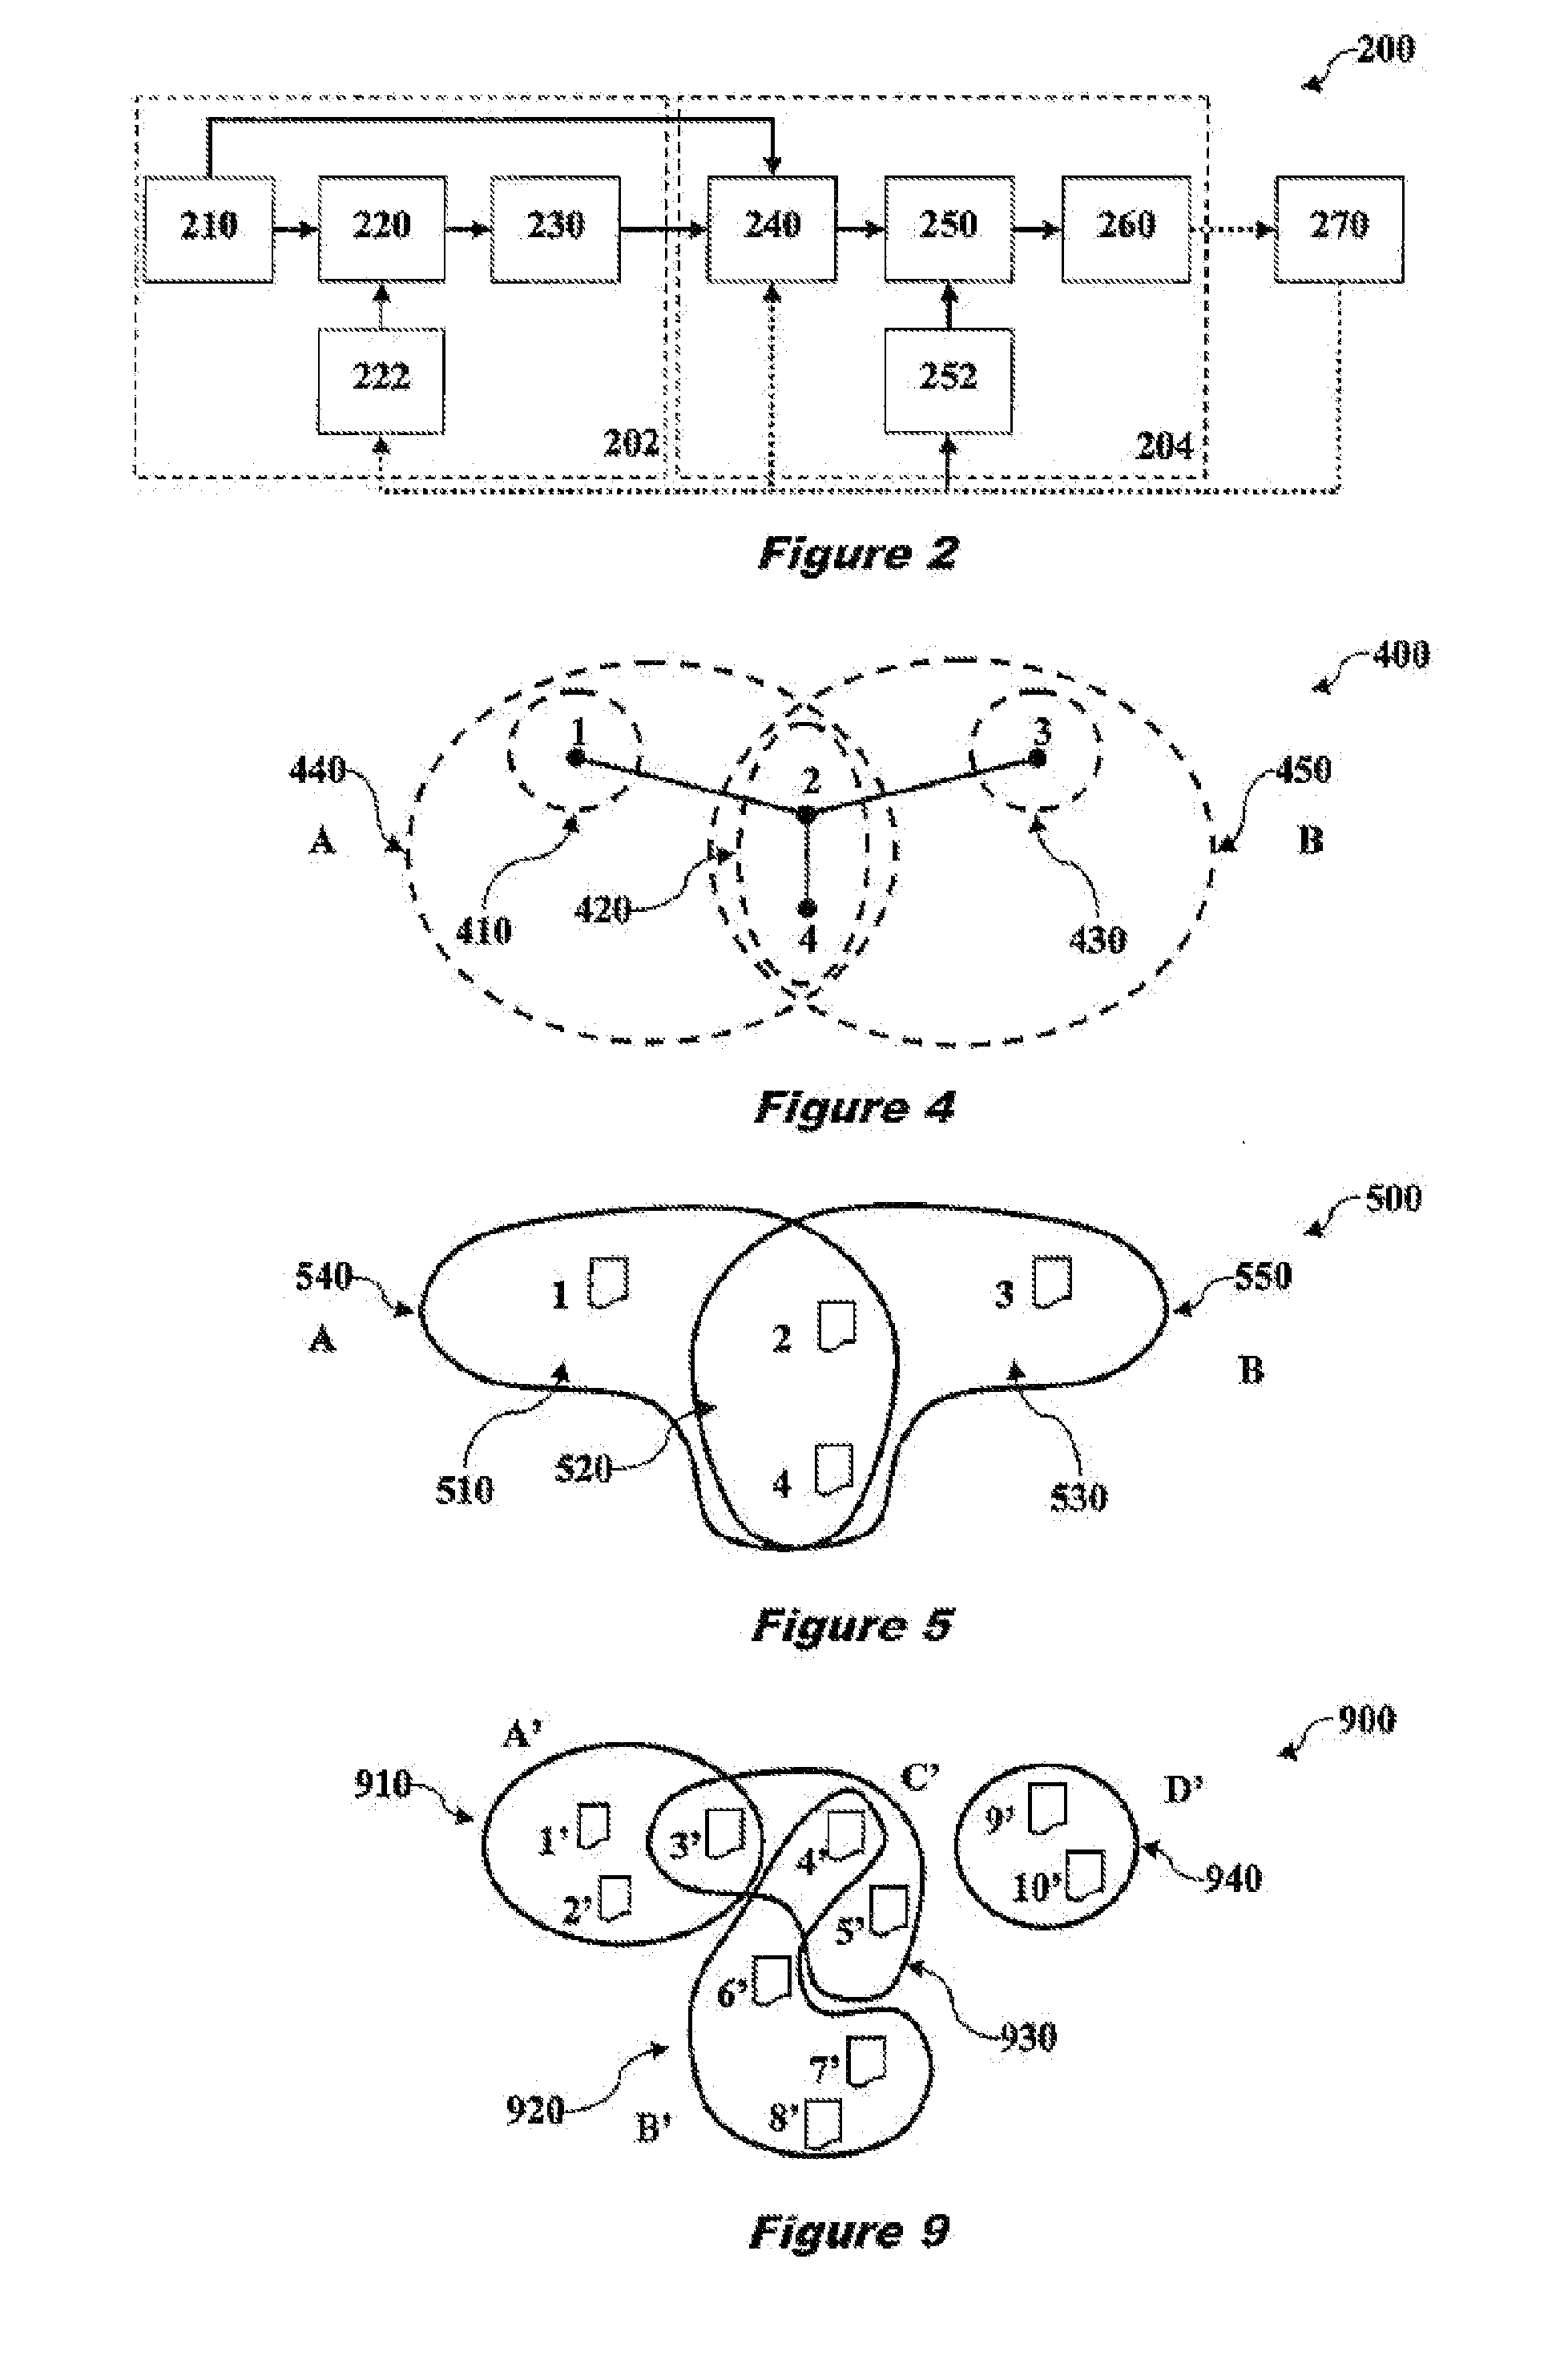 System and method for identifying and visualising topics and themes in collections of documents